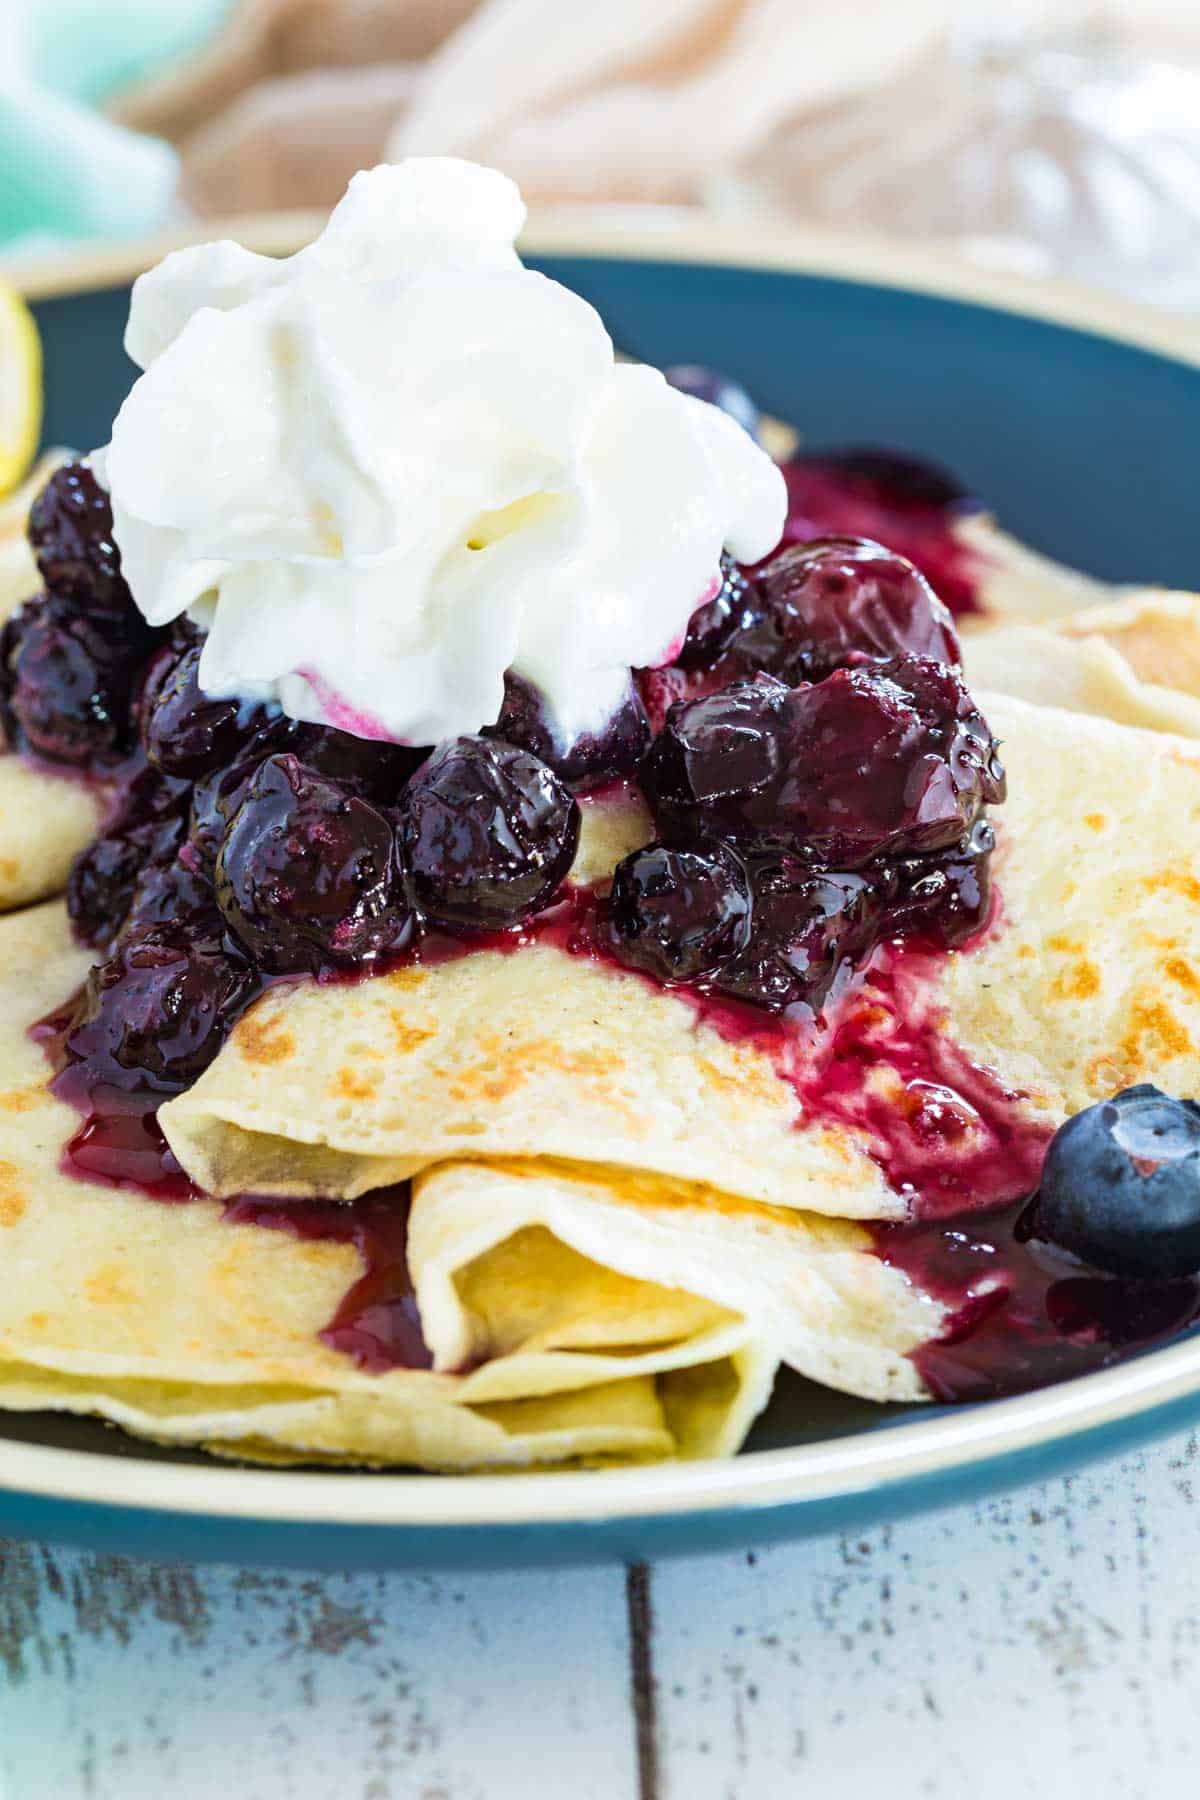 A close-up image of homemade crepes topped with blueberry sauce and whipped cream